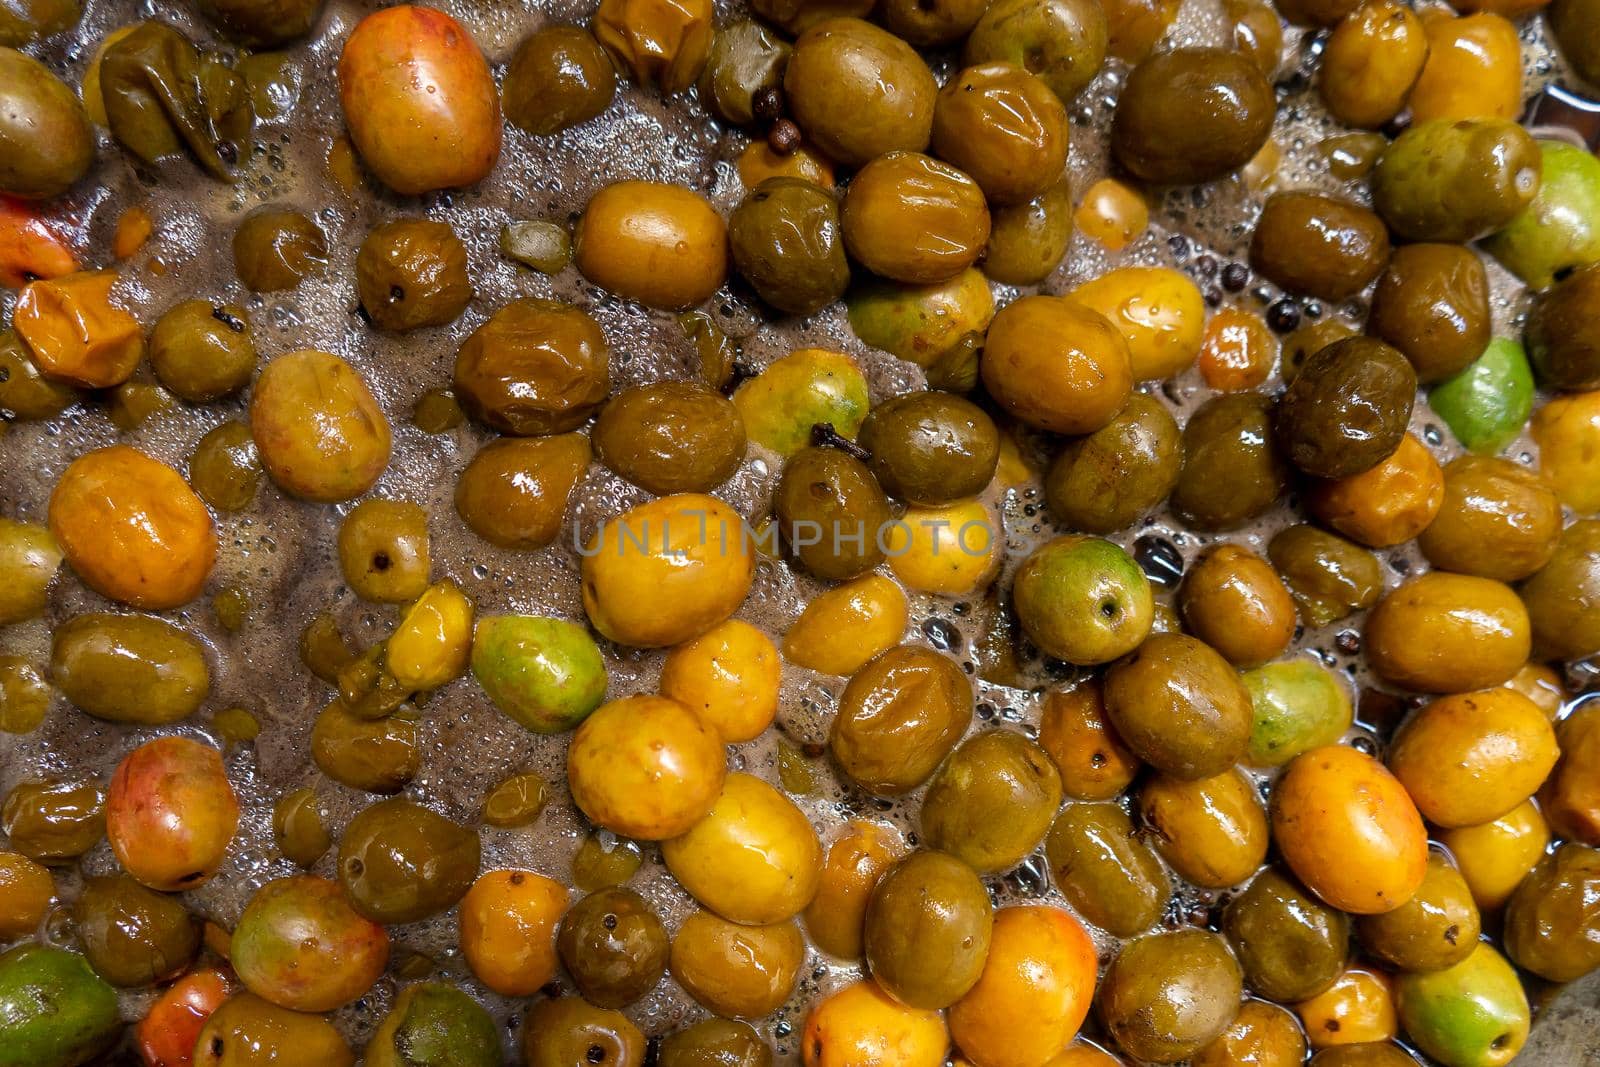 Boiling jocotes for syrup in a large metal pot. A tradition from Nicaragua and Central America during Holy Week and Easter. Top view.